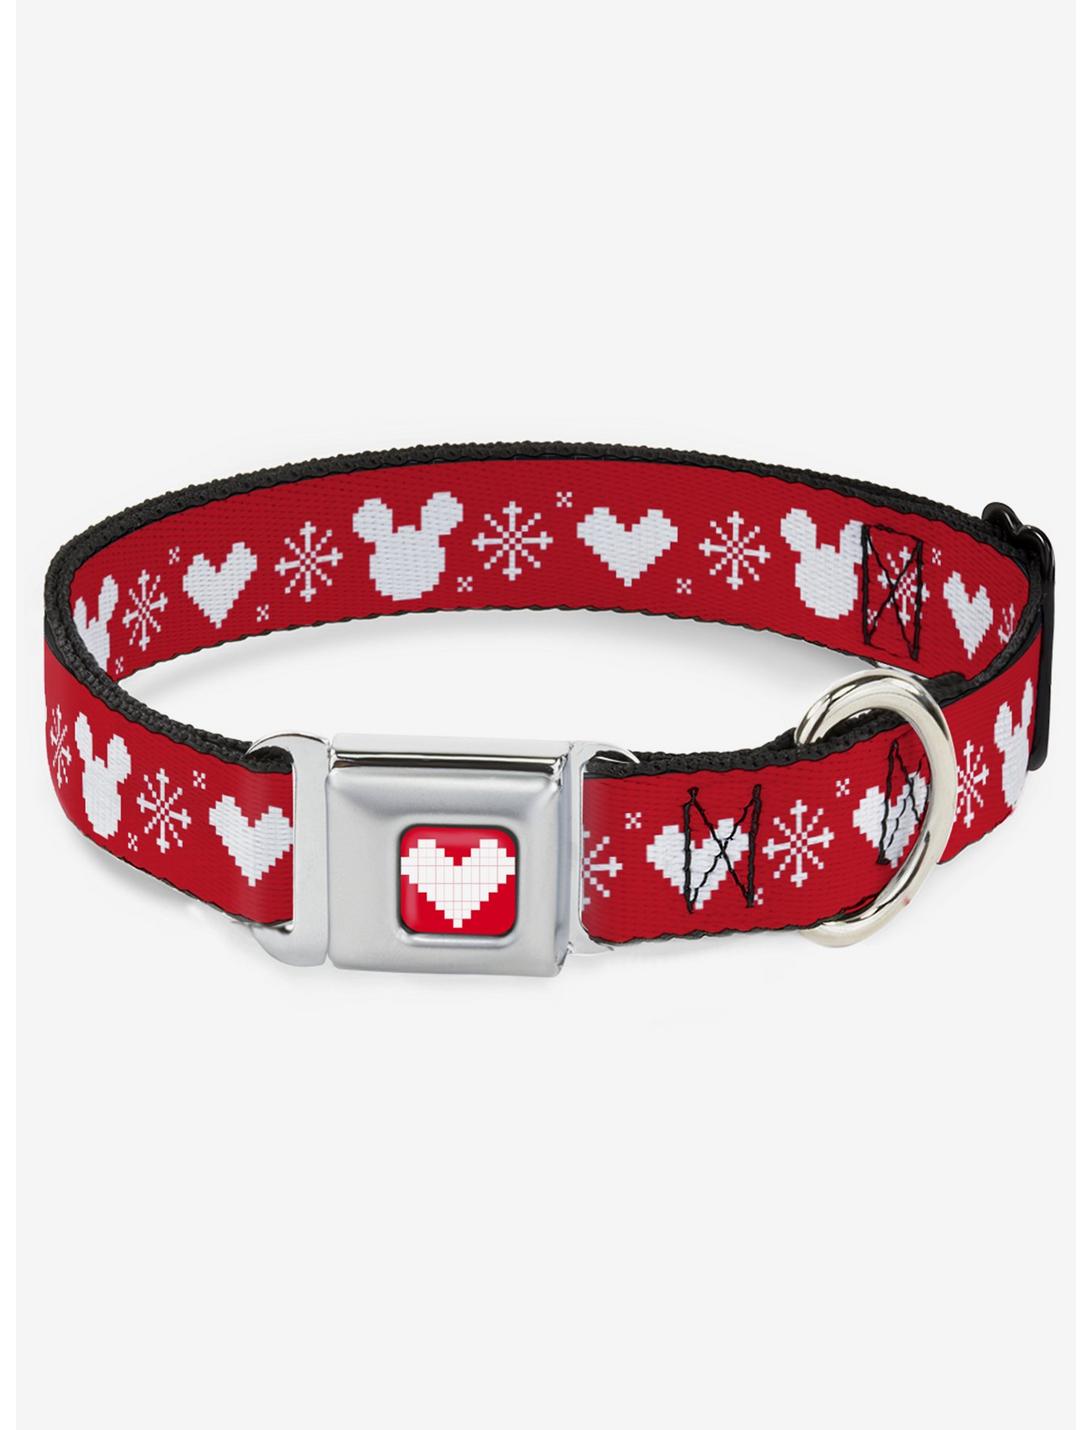 Disney Mickey Mouse Heart Sweater Stitch Seatbelt Buckle Dog Collar, RED, hi-res